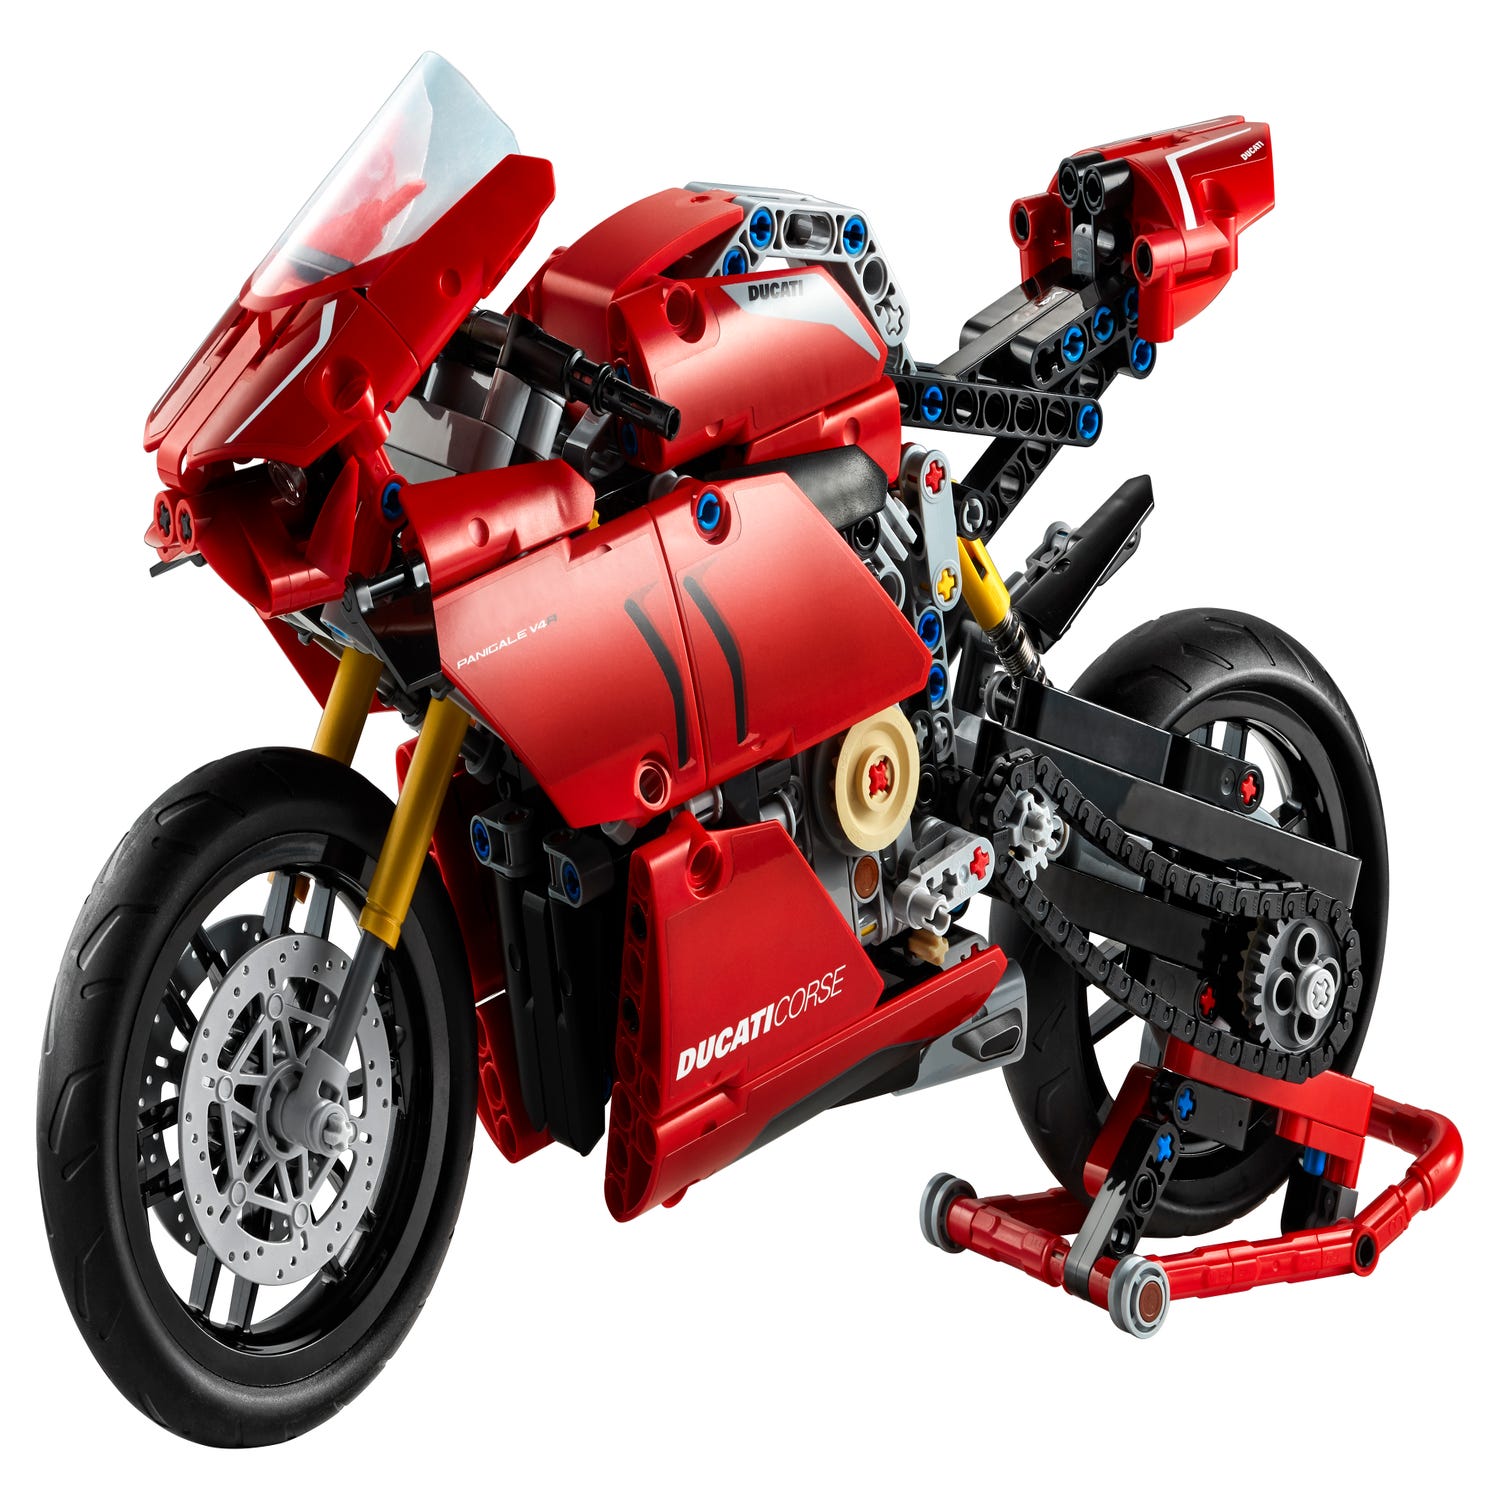 Ducati Panigale V4 R 42107 Technic Buy Online At The Official Lego Shop Us